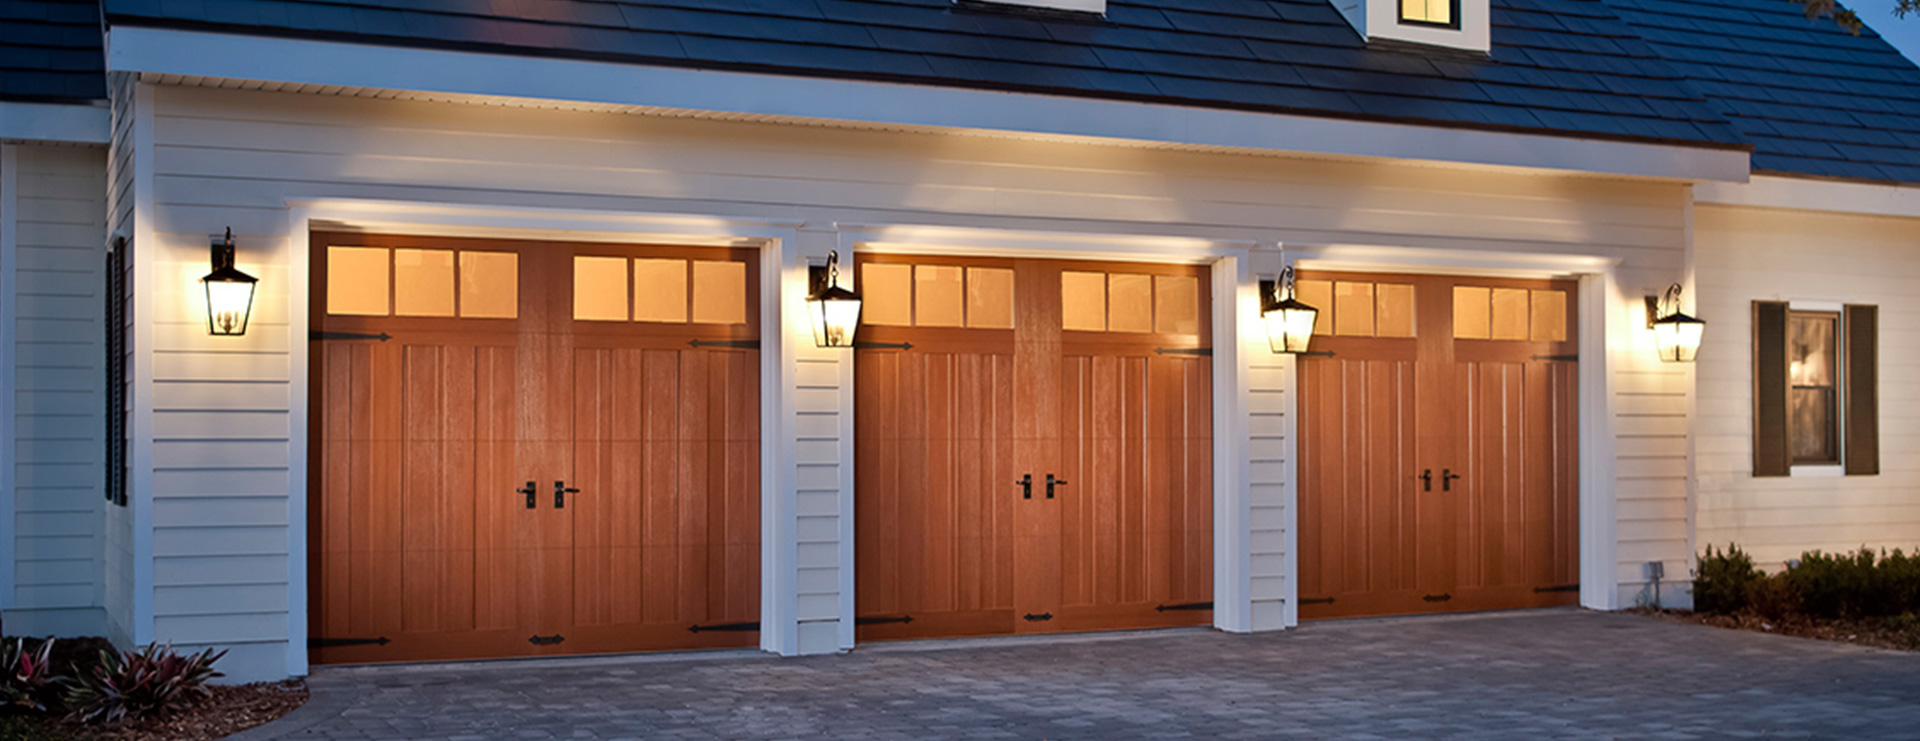 Home with three full width Canyon Ridge Limited Edition Series carriage house garage doors